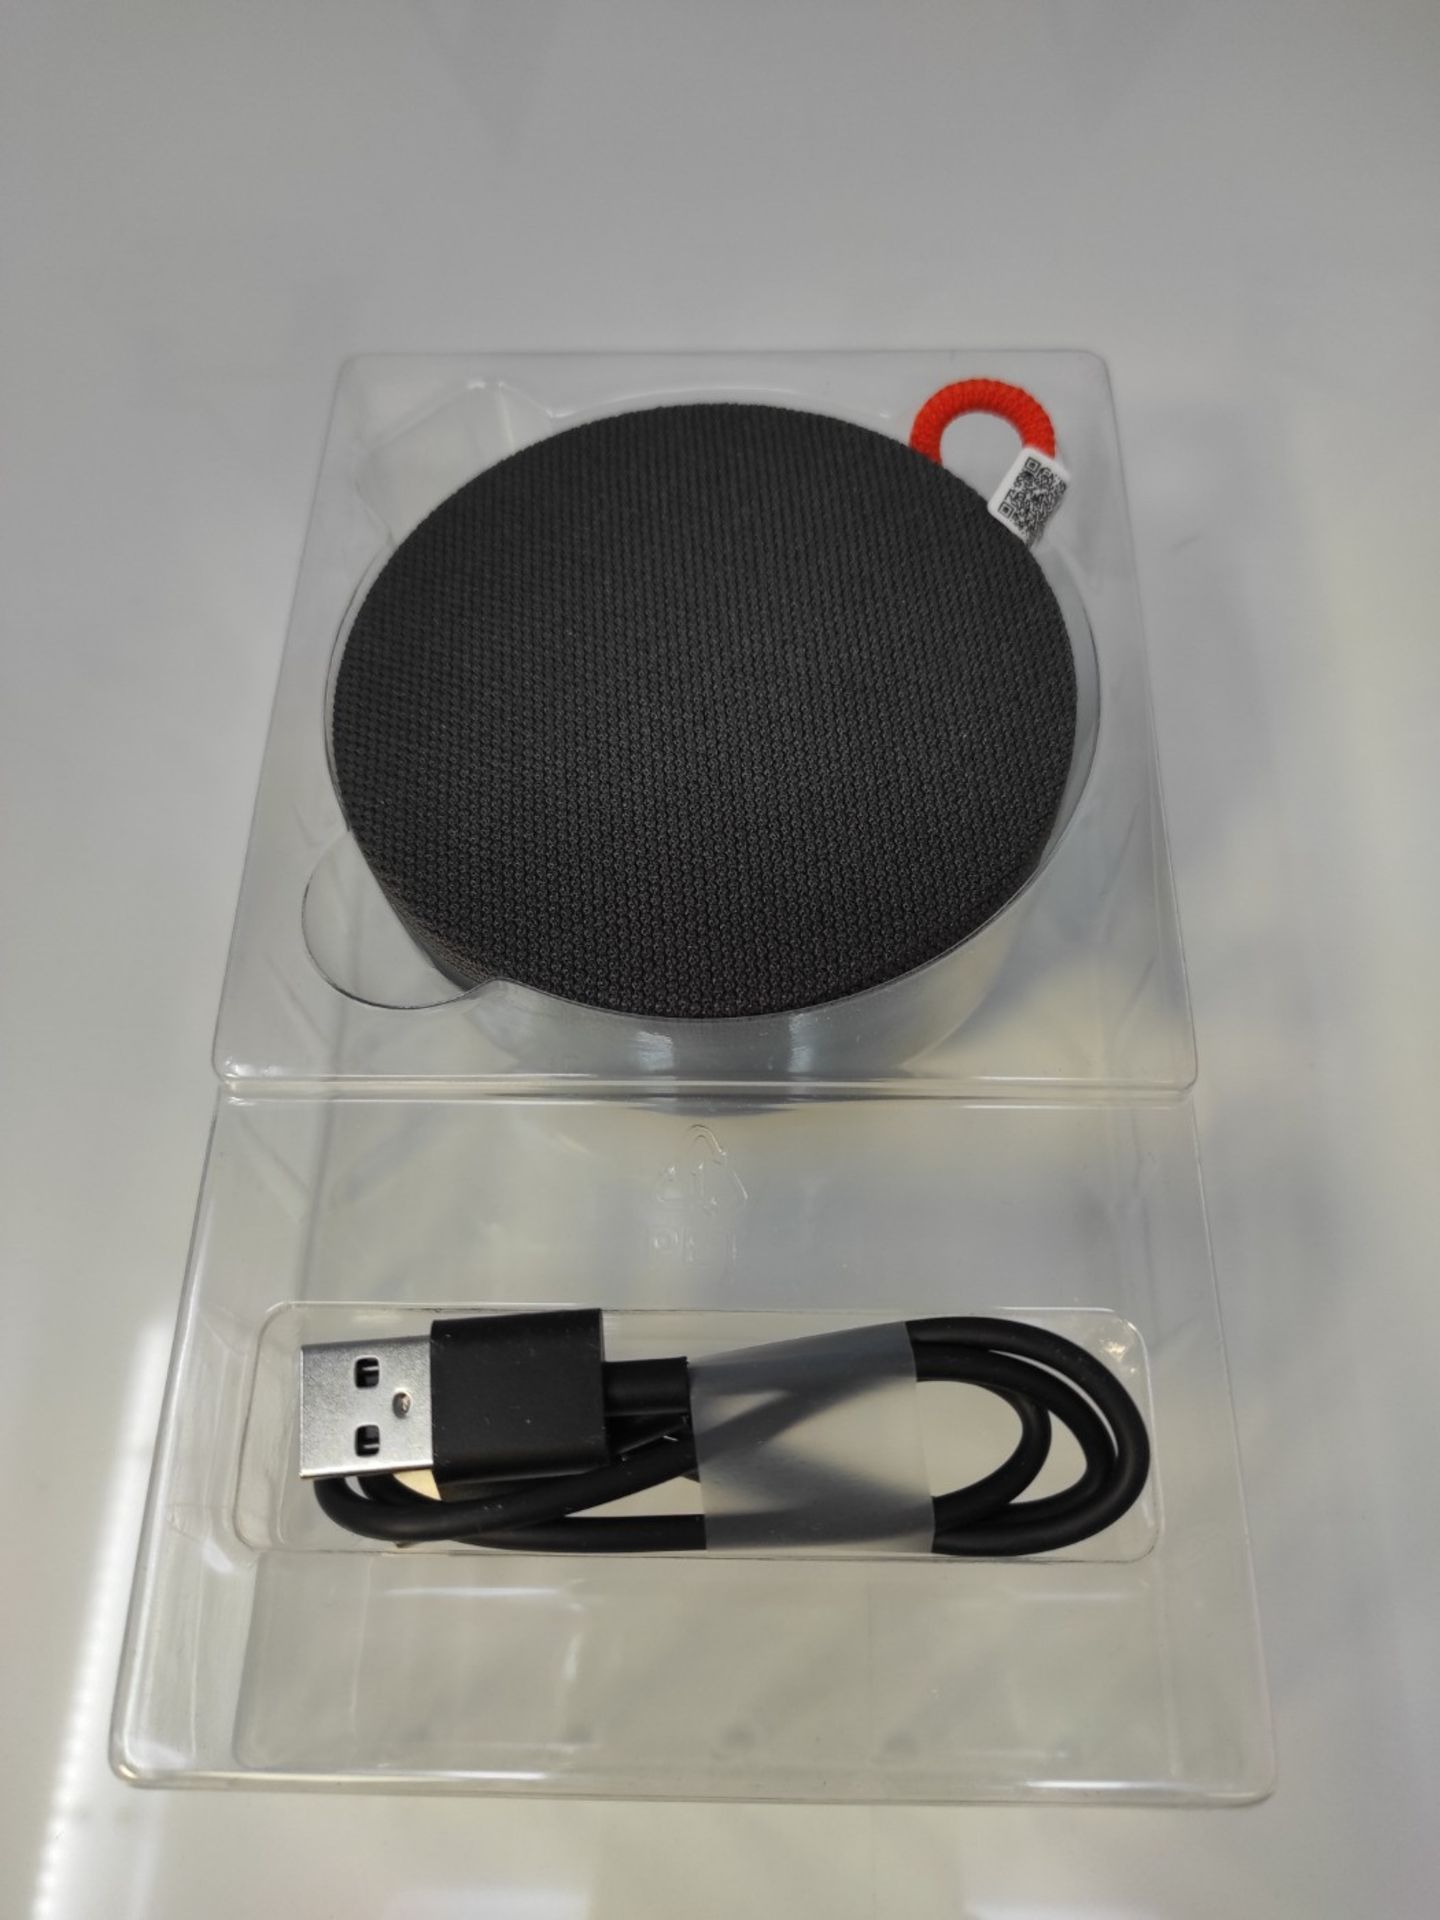 Xiaomi Mi Portable Speaker, Portable Speaker with Bluetooth Connection, Dustproof and - Image 6 of 6